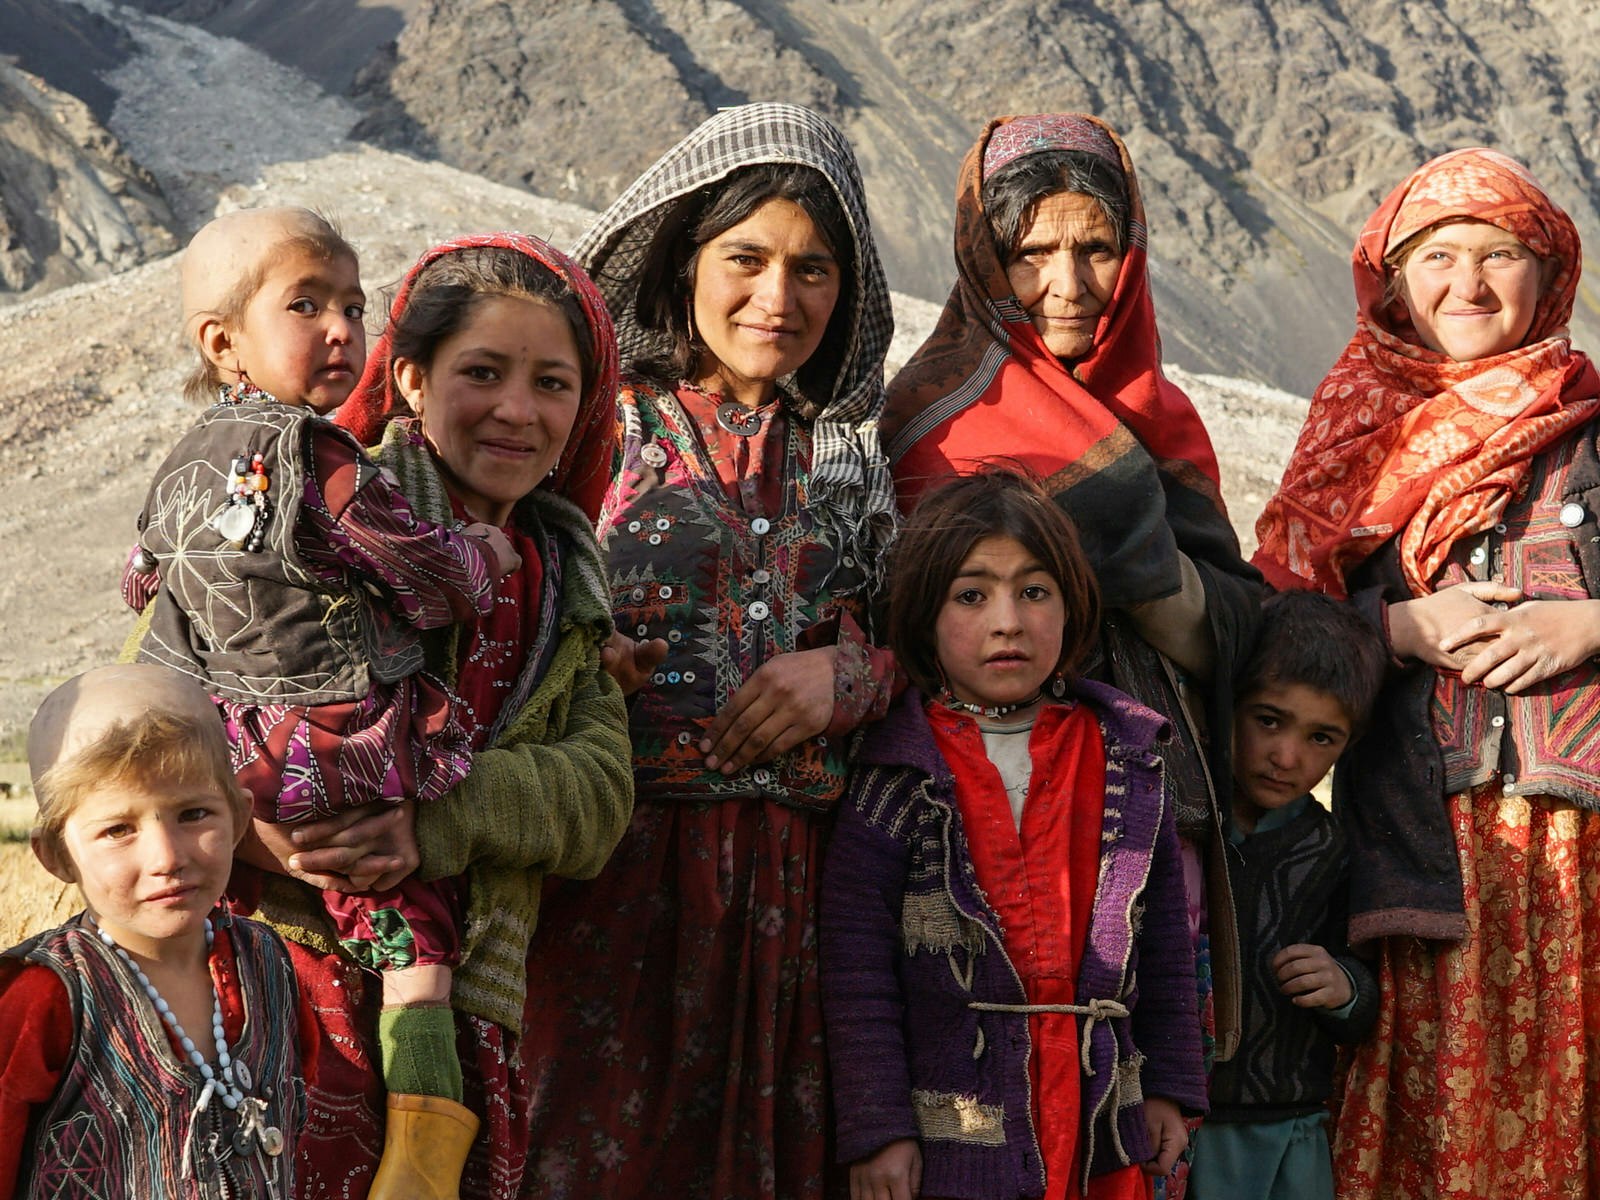 A Wakhan Kyrgyz family with grandmother, mothers and children, all dressed in traditional headscarves and colourful, embroidered clothing